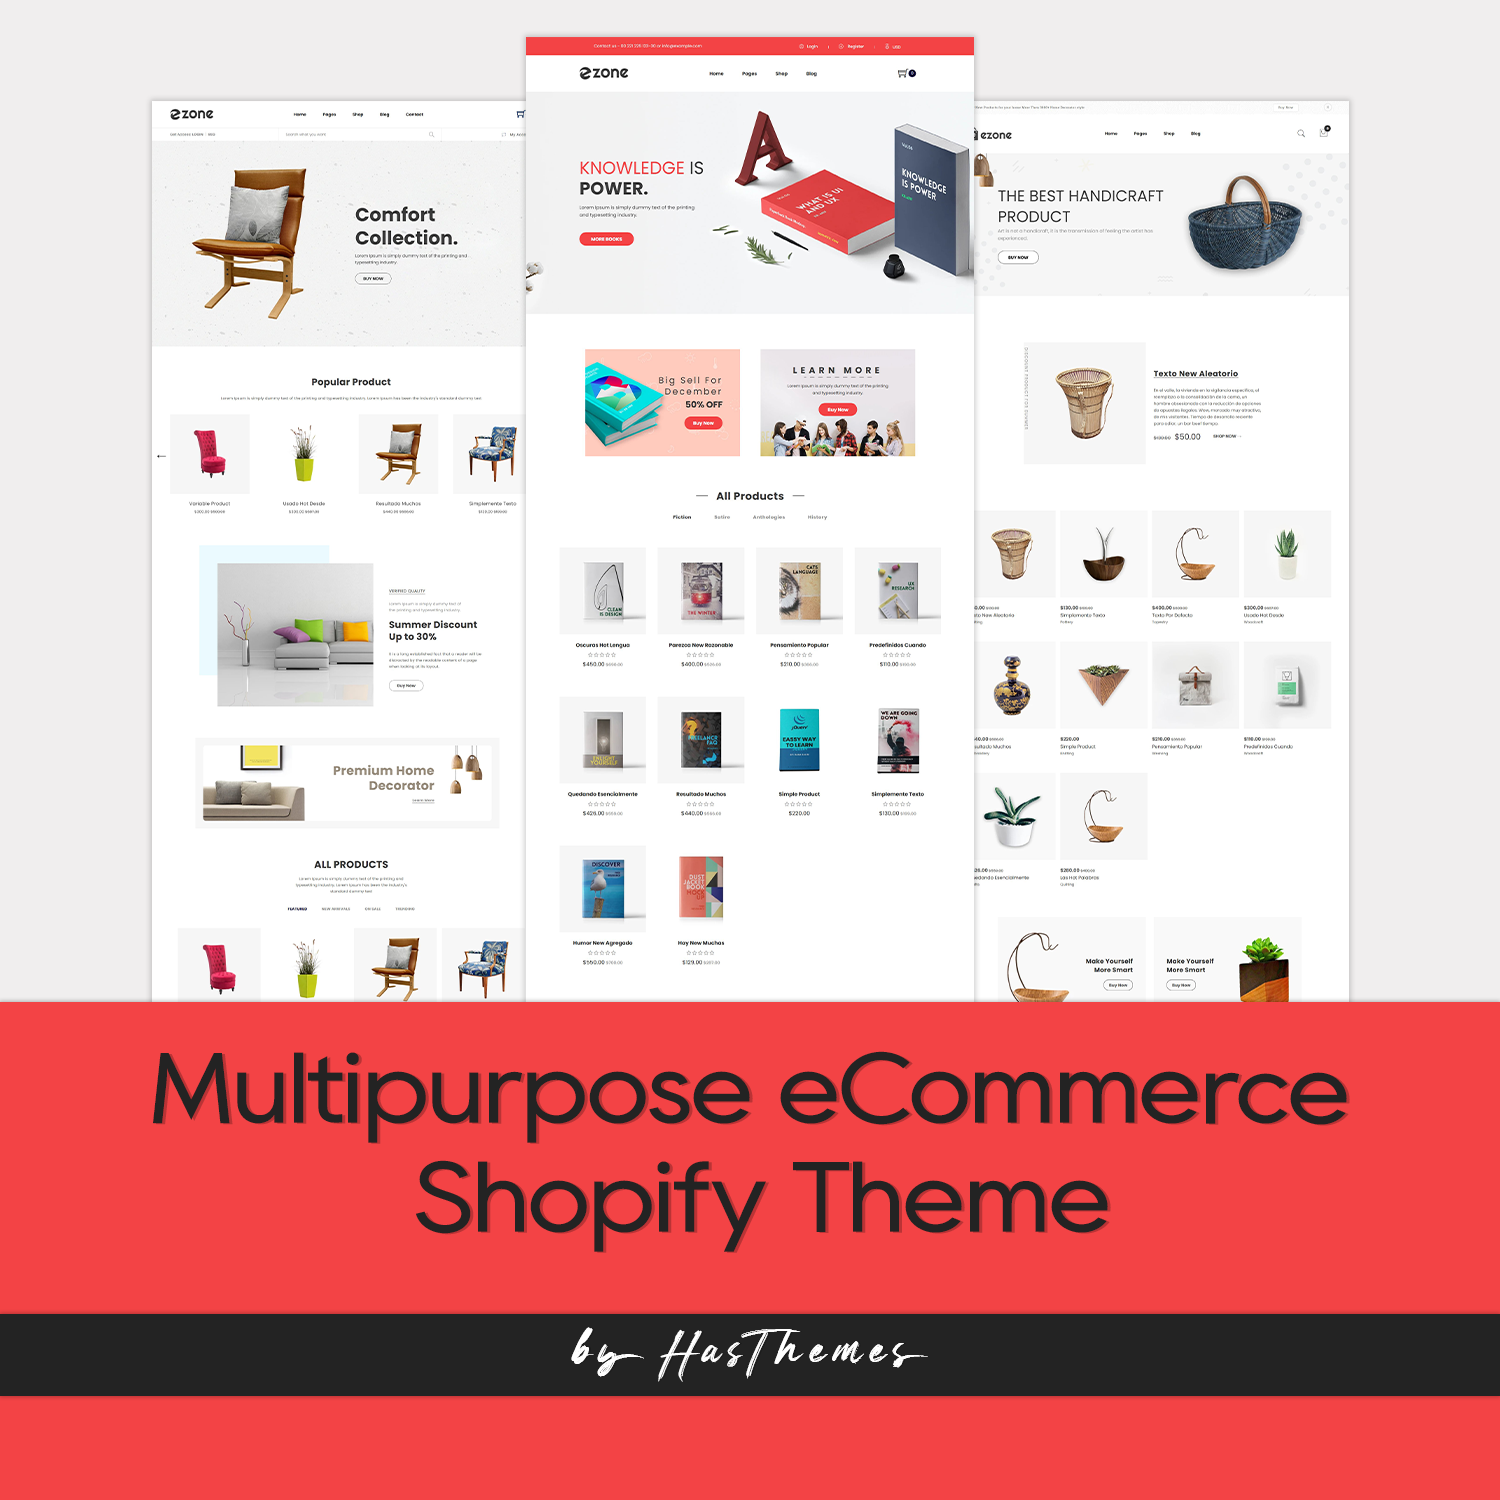 Multipurpose eCommerce Shopify Theme cover.